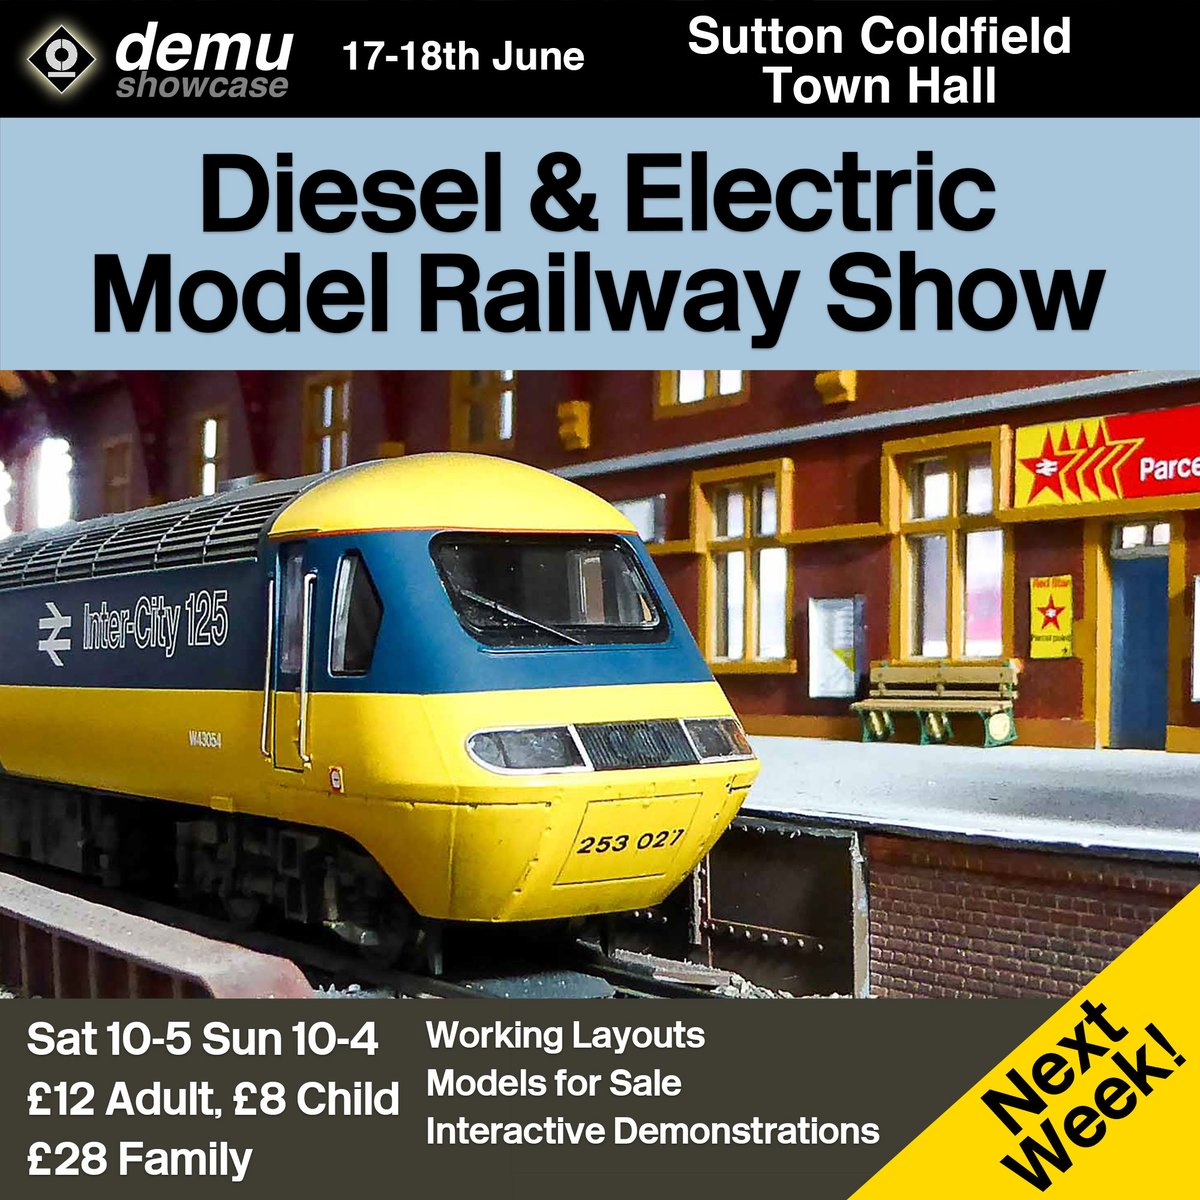 We're gearing up for DEMU Showcase next week at Sutton Coldfield Town Hall. Come along an enjoy the layouts, sample the trade and support the society!